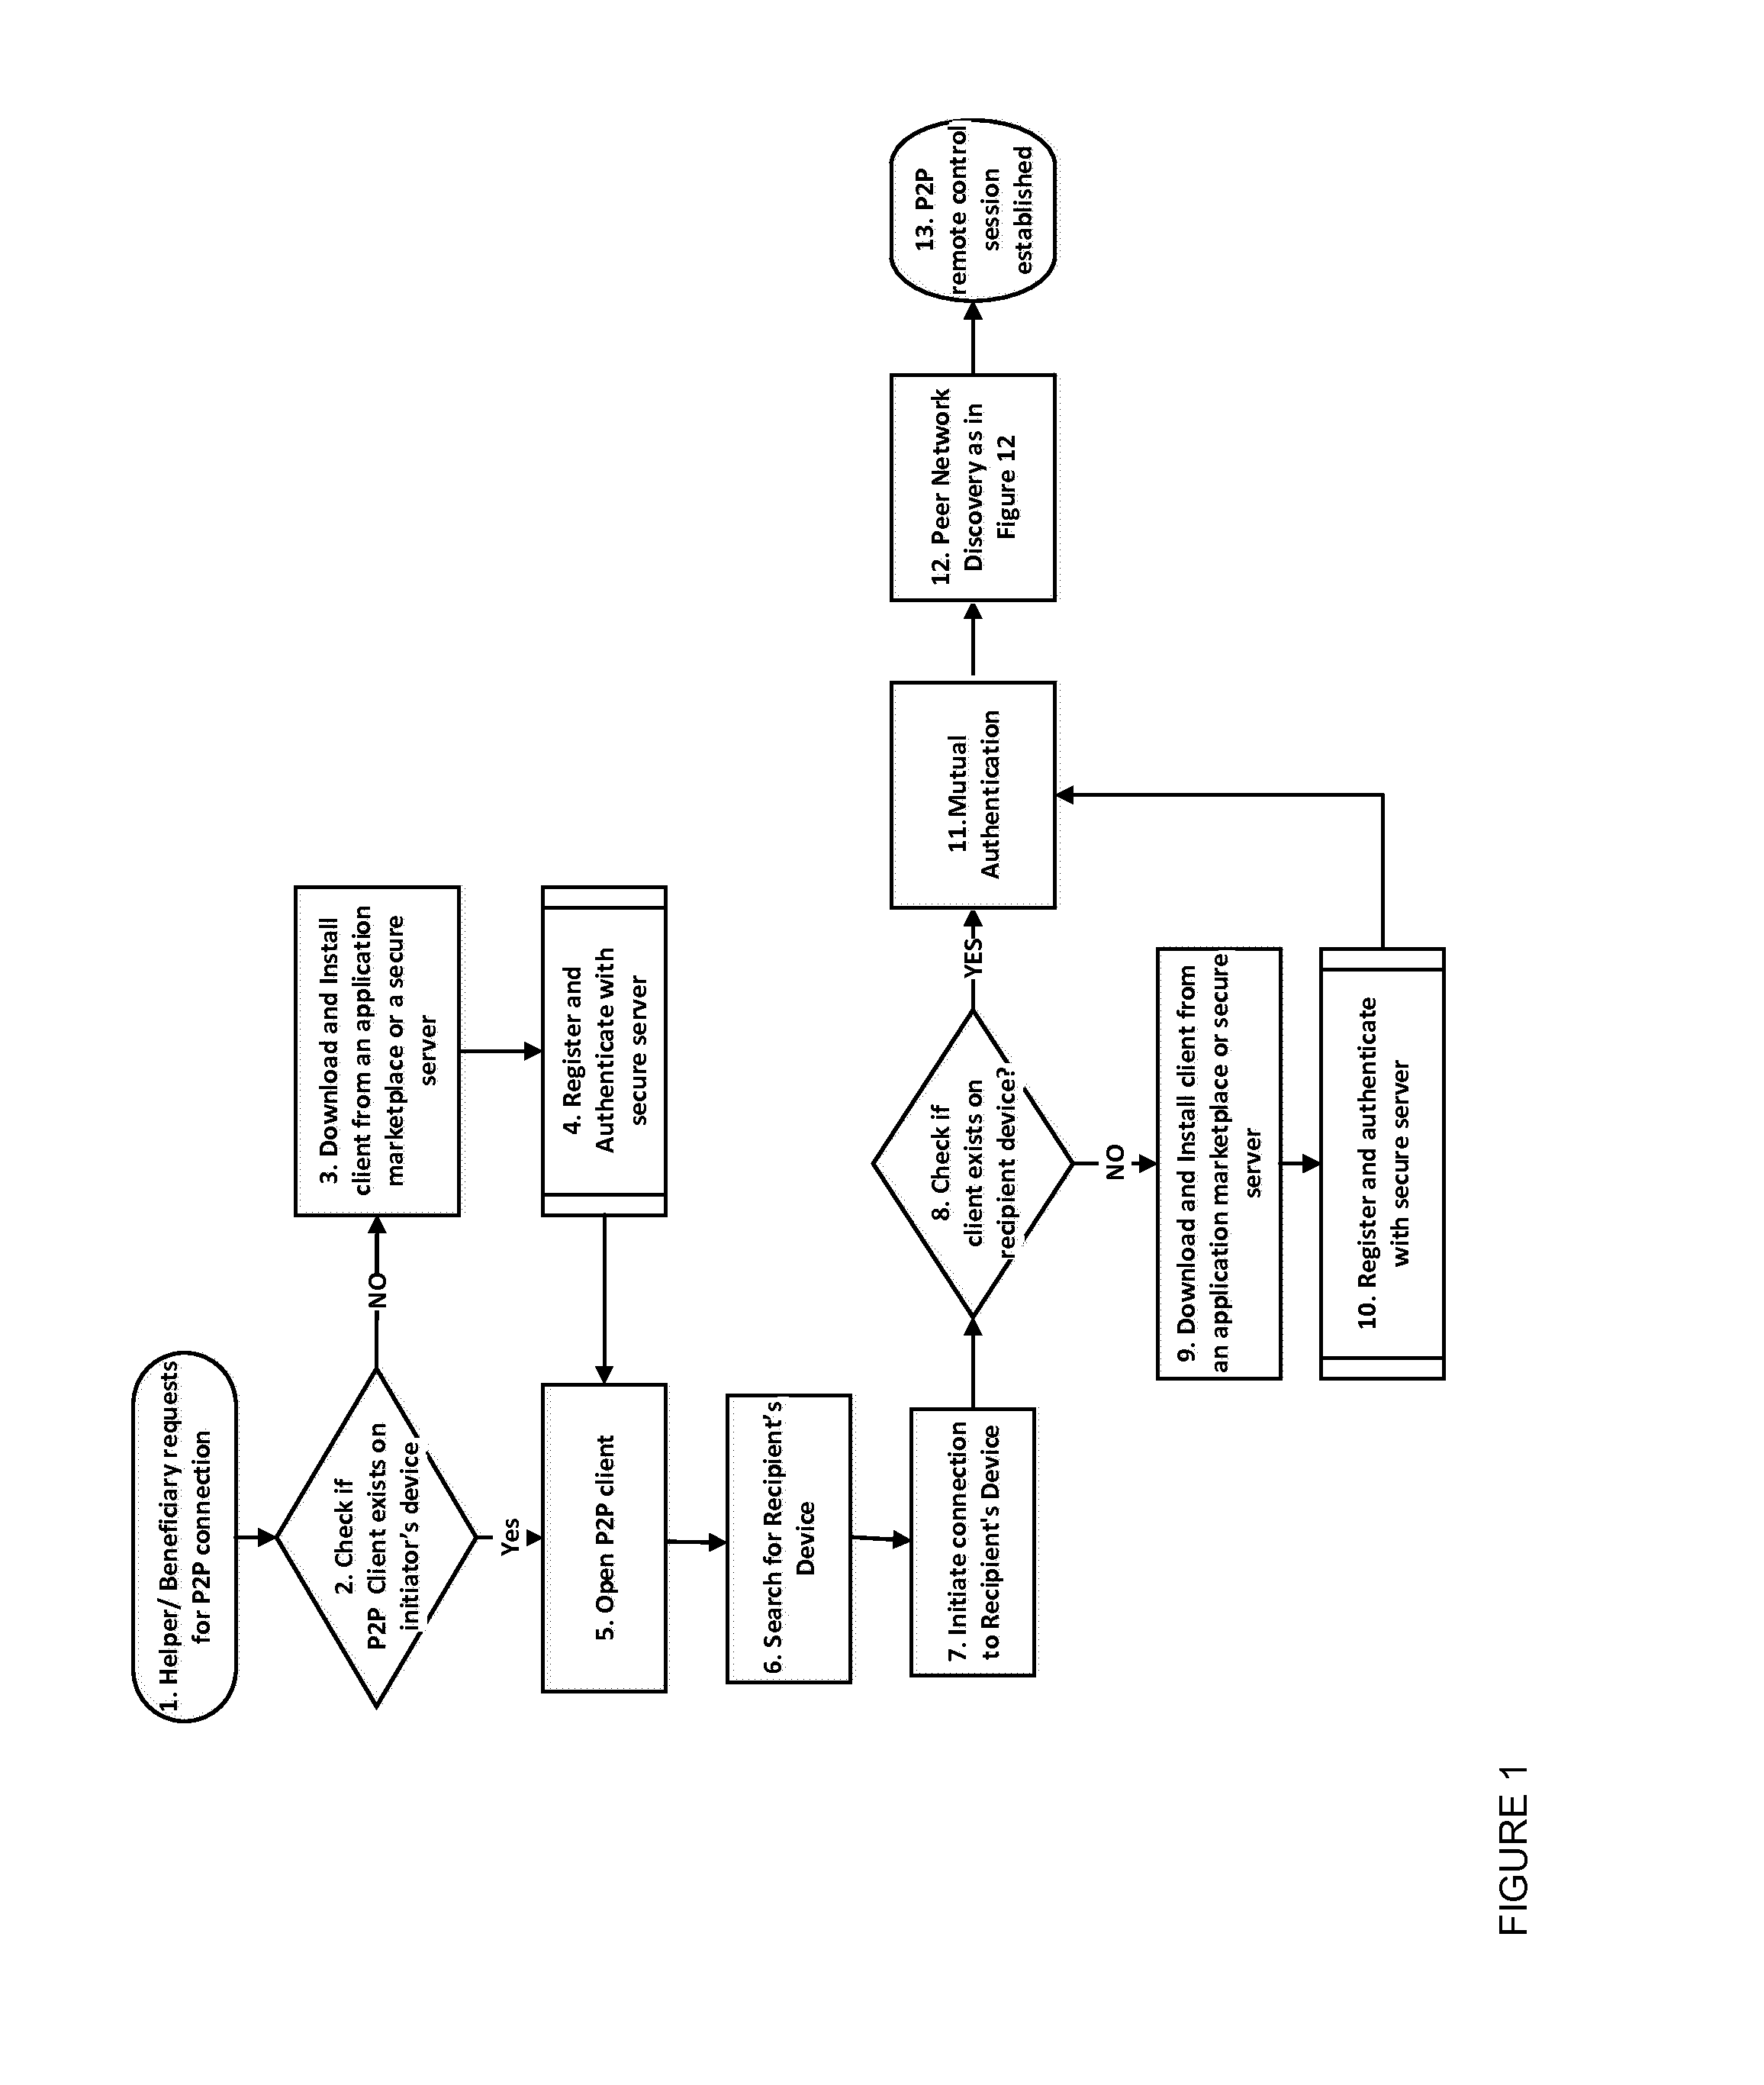 Peer to peer remote control method between one or more mobile devices